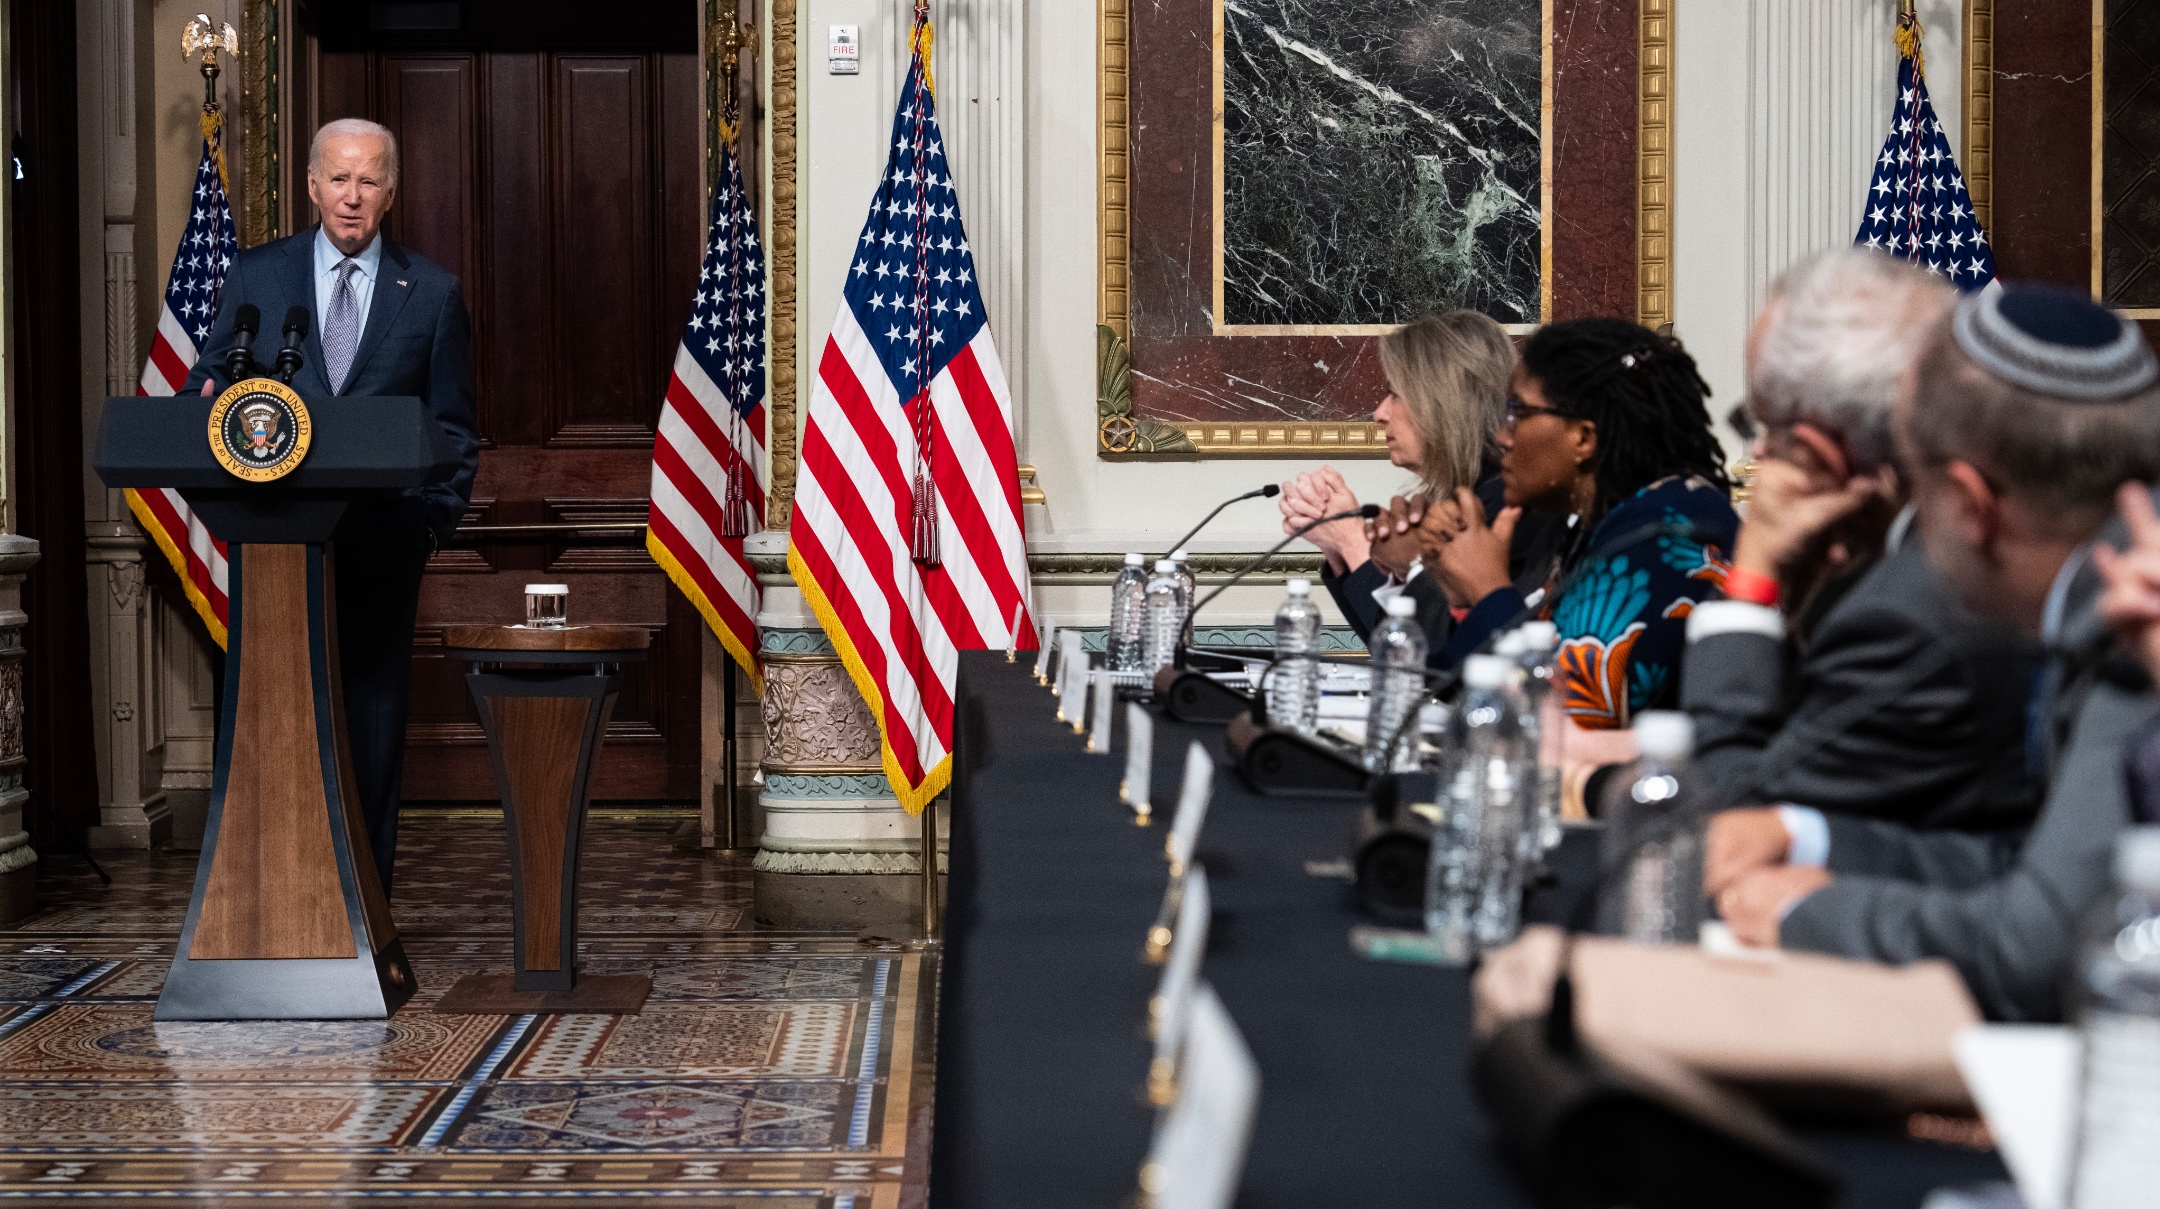 U.S. President Joe Biden speaks during a roundtable with Jewish community leaders in the Indian Treaty Room of the Eisenhower Executive Office Building, next to the White House, Oct. 11, 2023. (Drew Angerer/Getty Images)